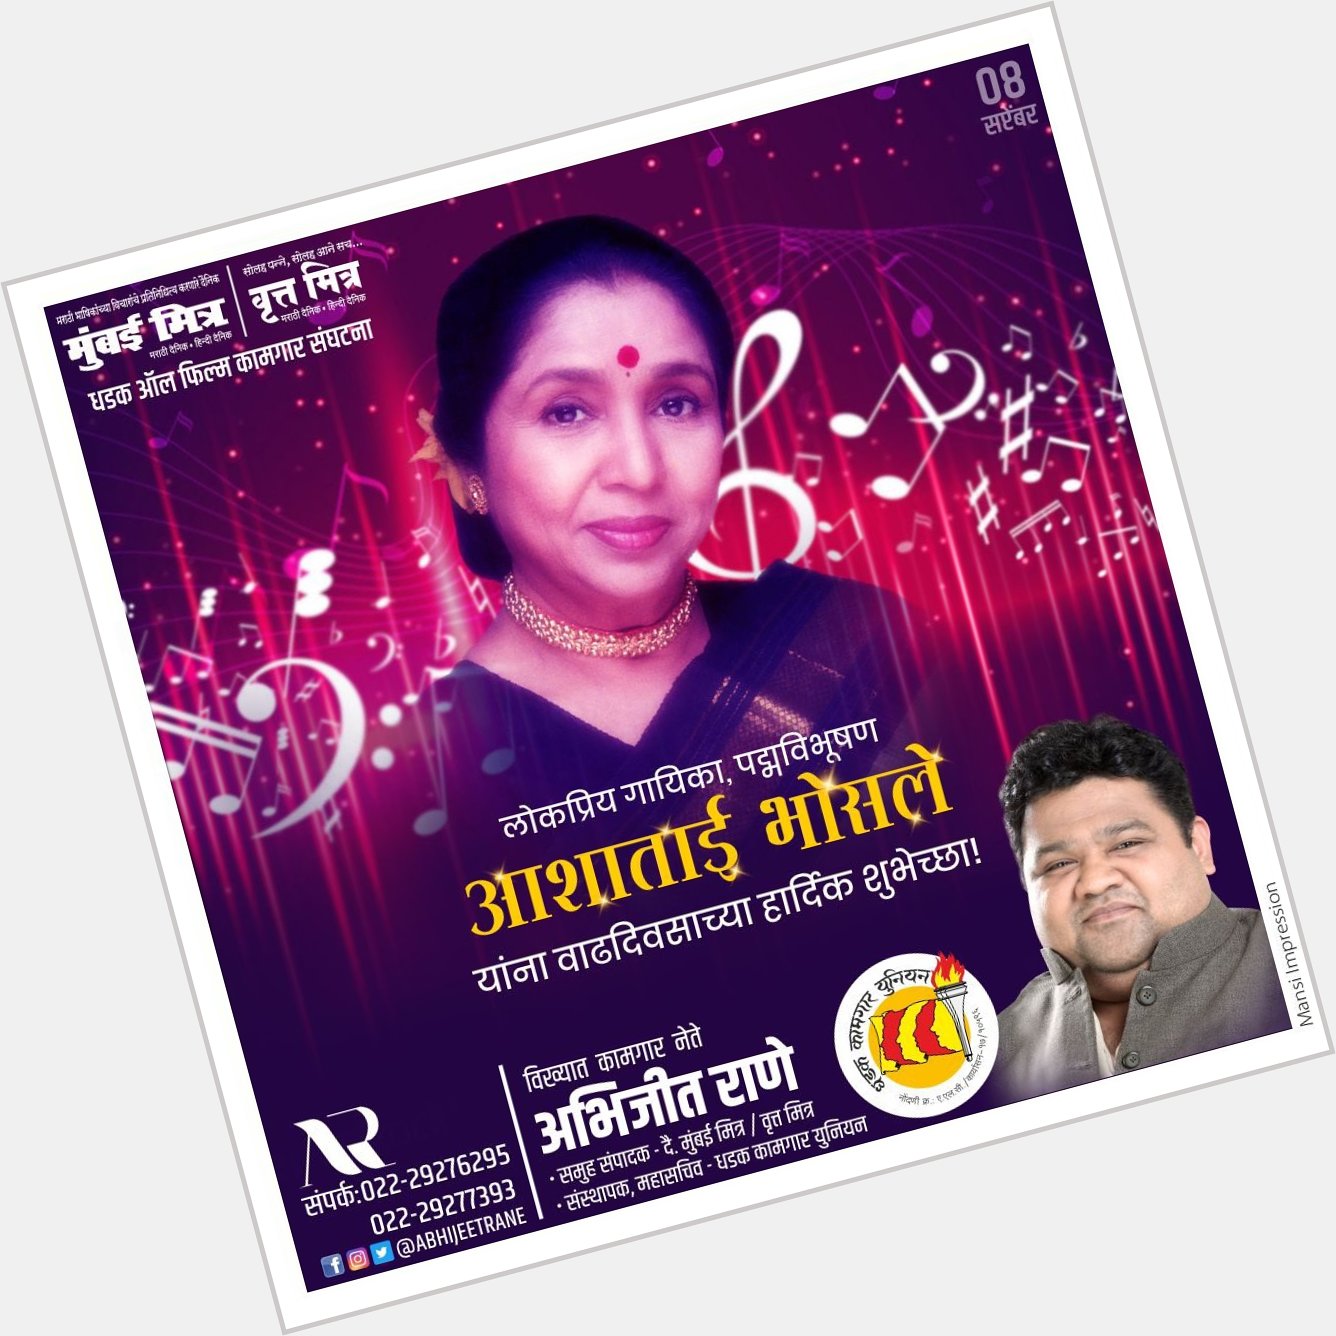 On the occasion of her birthday, i wish a long, happy and peaceful life to Smt. Asha Bhosle ji. 